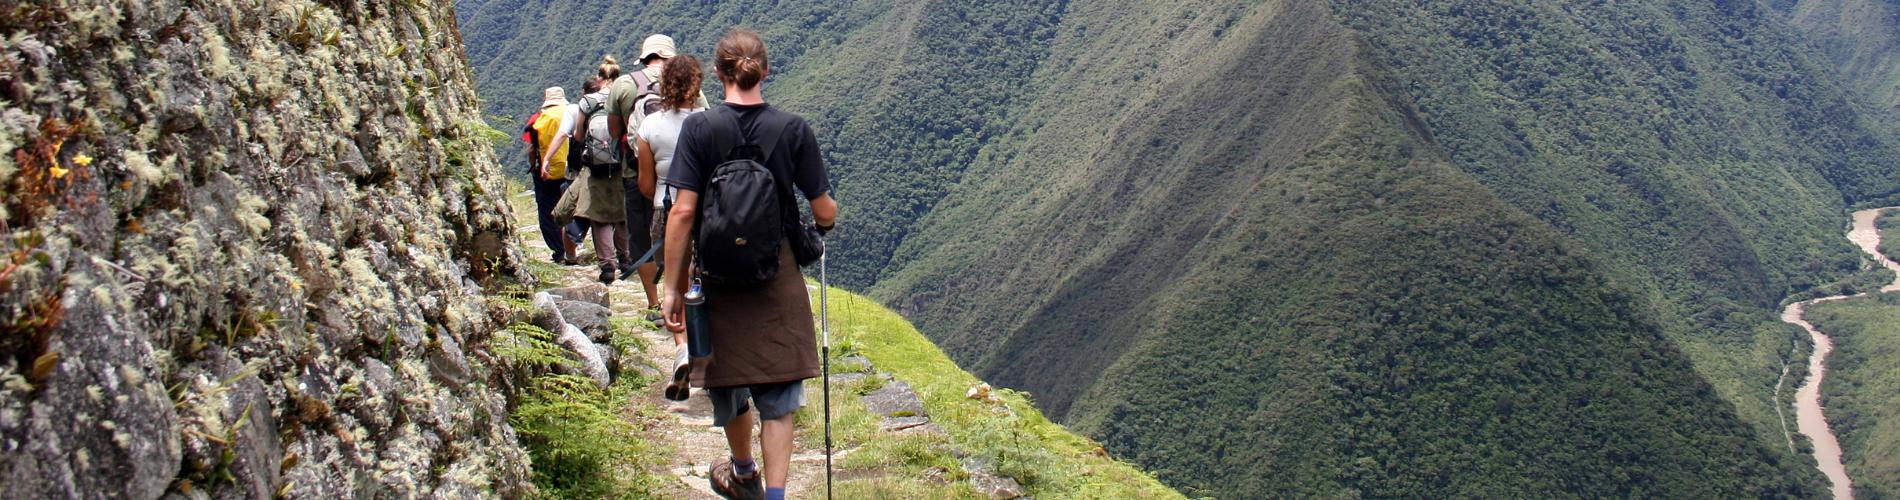 4 Tips on How to Hike Sustainably in Peru